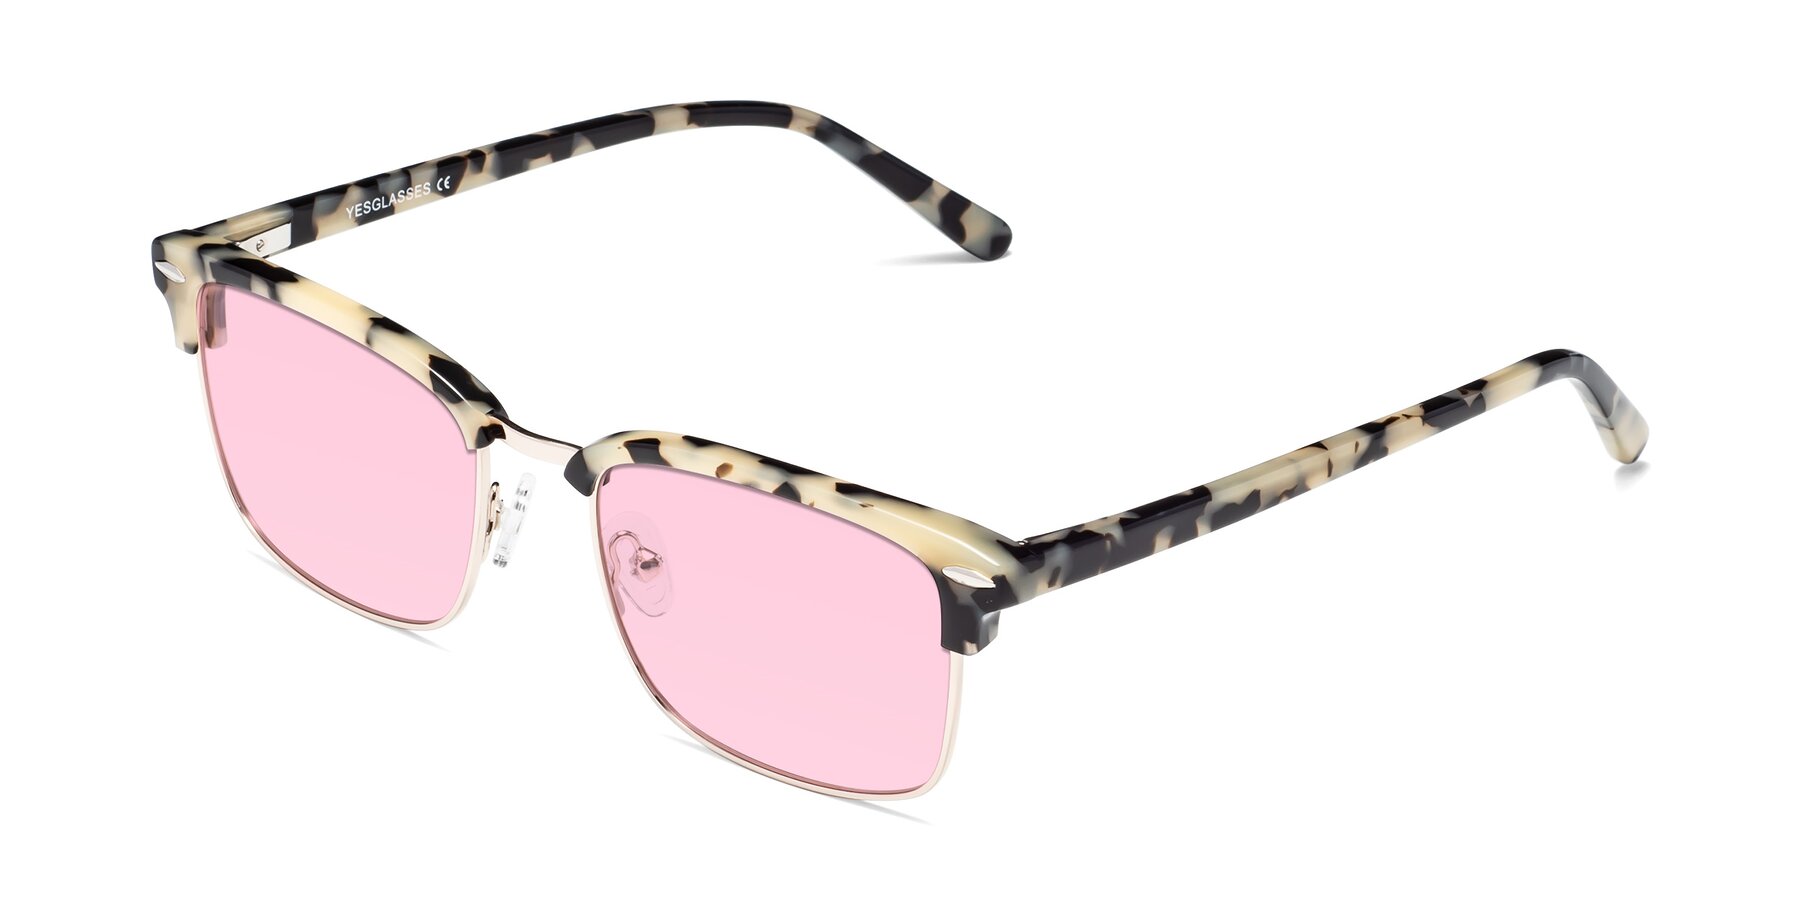 Angle of 17464 in Tortoise-Gold with Light Pink Tinted Lenses